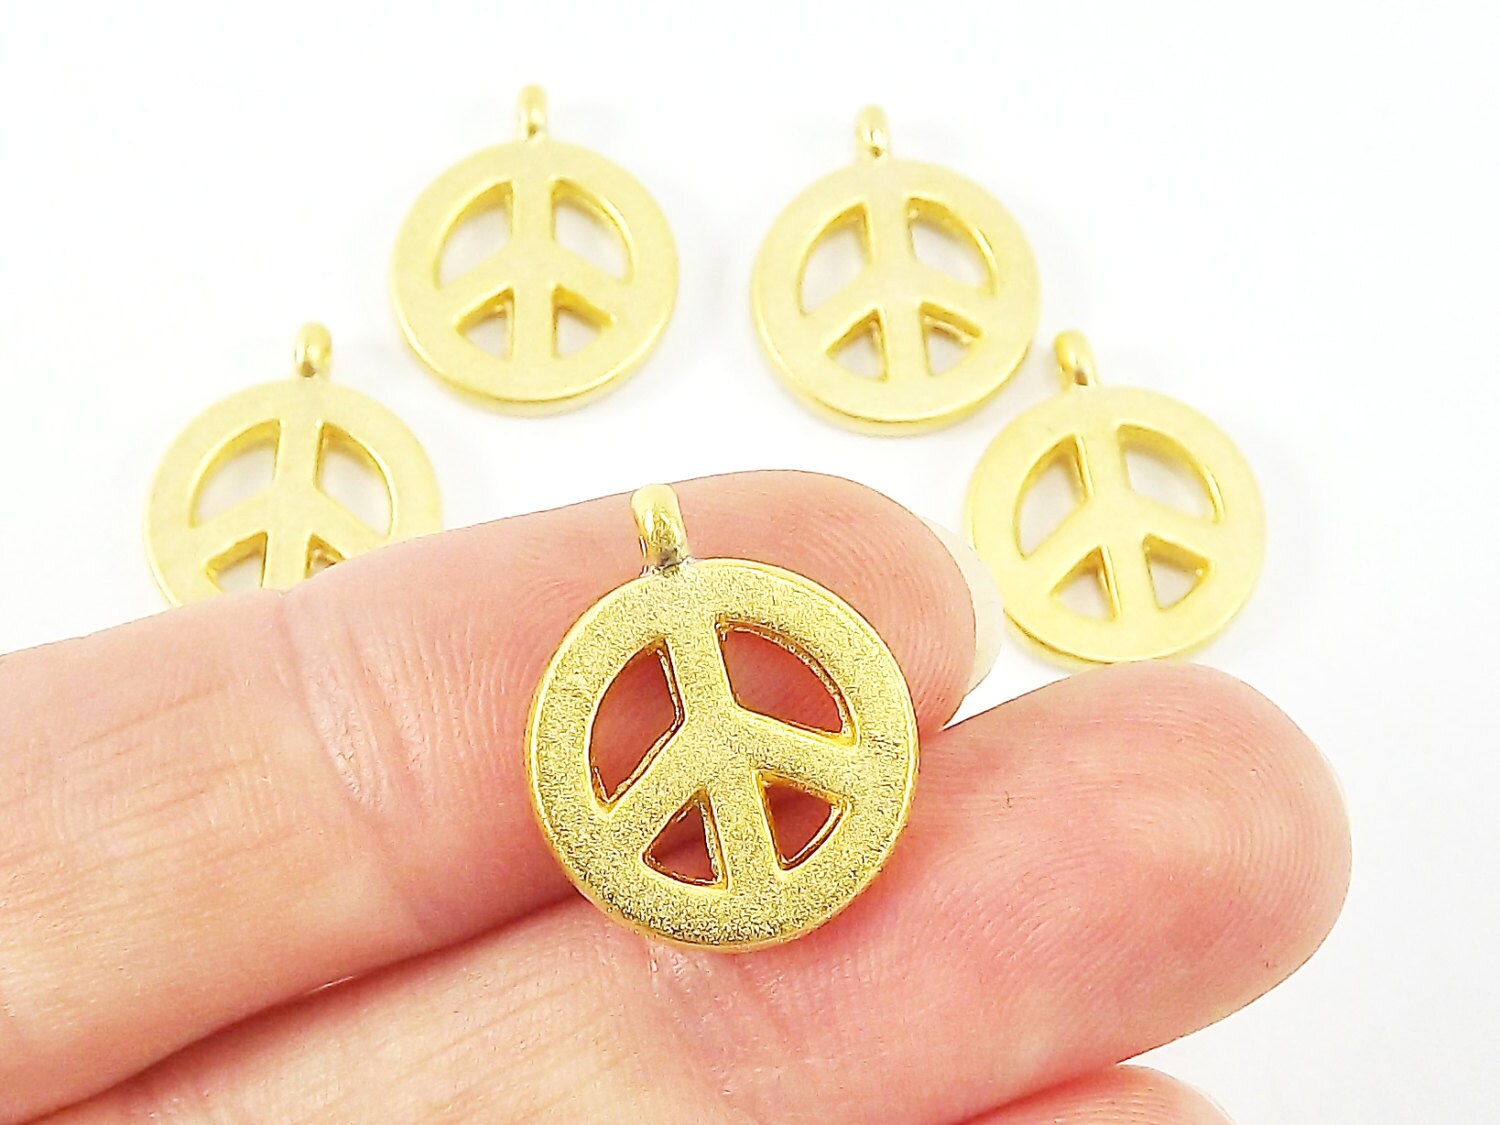 5 Peace Symbol Pendant Charms - 22k Matte Gold Plated